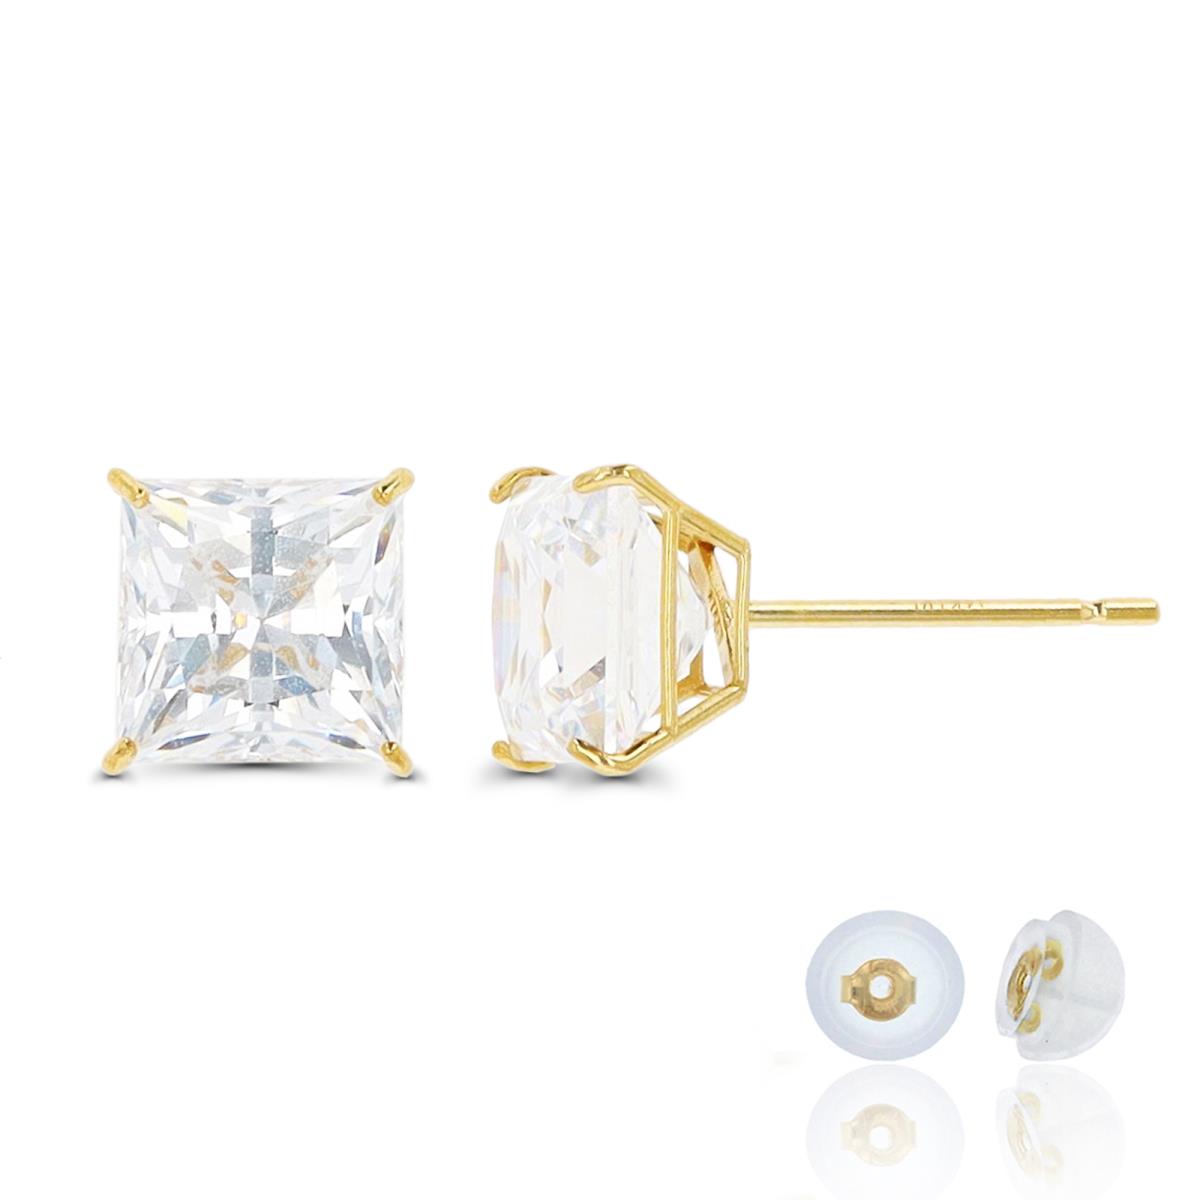 14K Yellow Gold 6mm Square White CZ Stud Earring Silicone Back